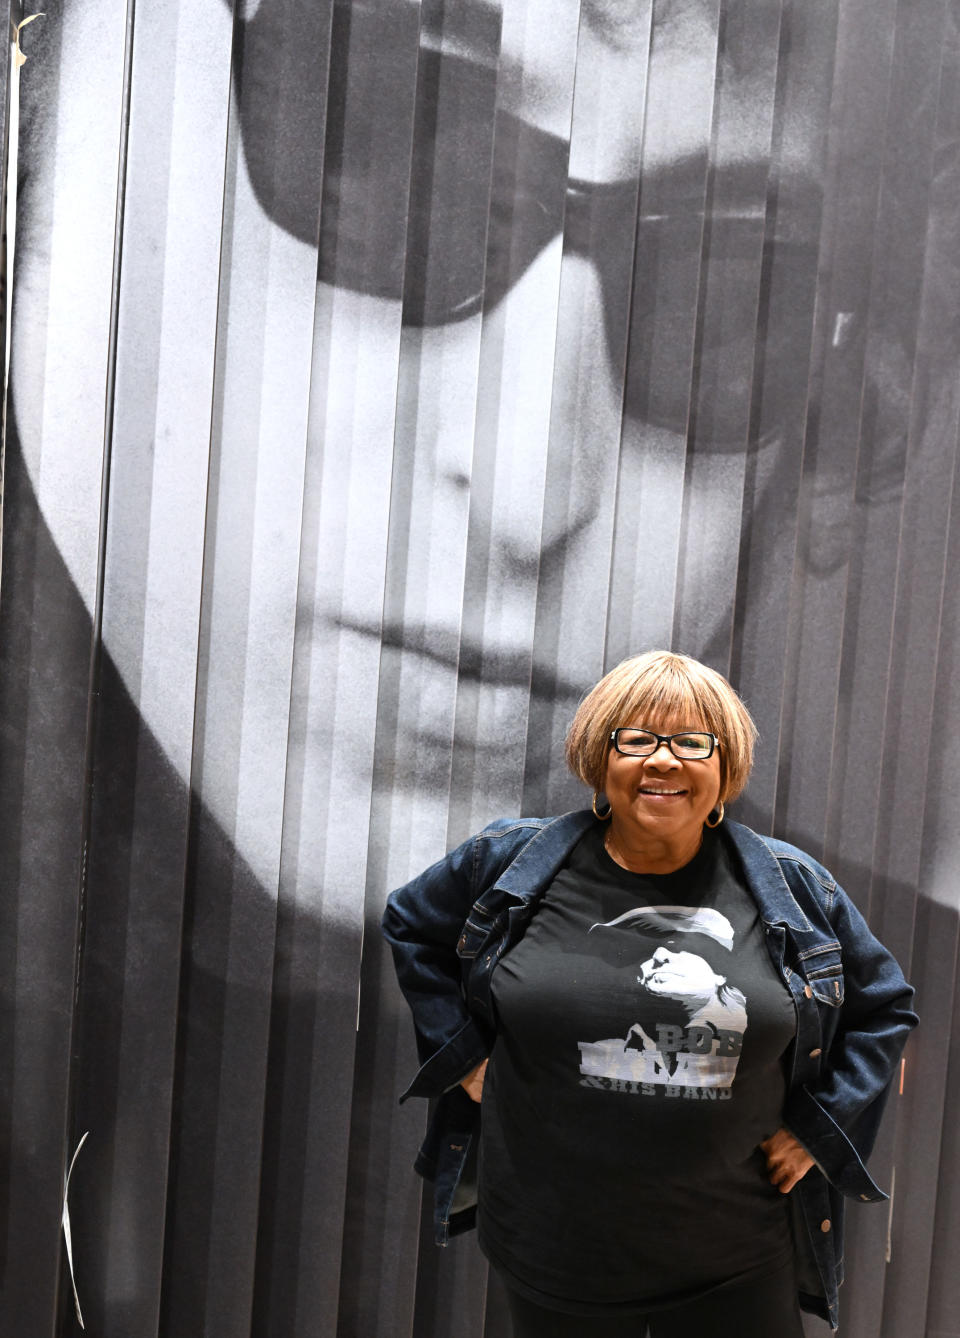 TULSA, OKLAHOMA – MAY 05: Singer Mavis Staples attends the grand opening of the Bob Dylan Center on May 05, 2022 in Tulsa, Oklahoma. (Photo by Lester Cohen/Getty Images for The Bob Dylan Center) - Credit: Lester Cohen for The Bob Dylan Center